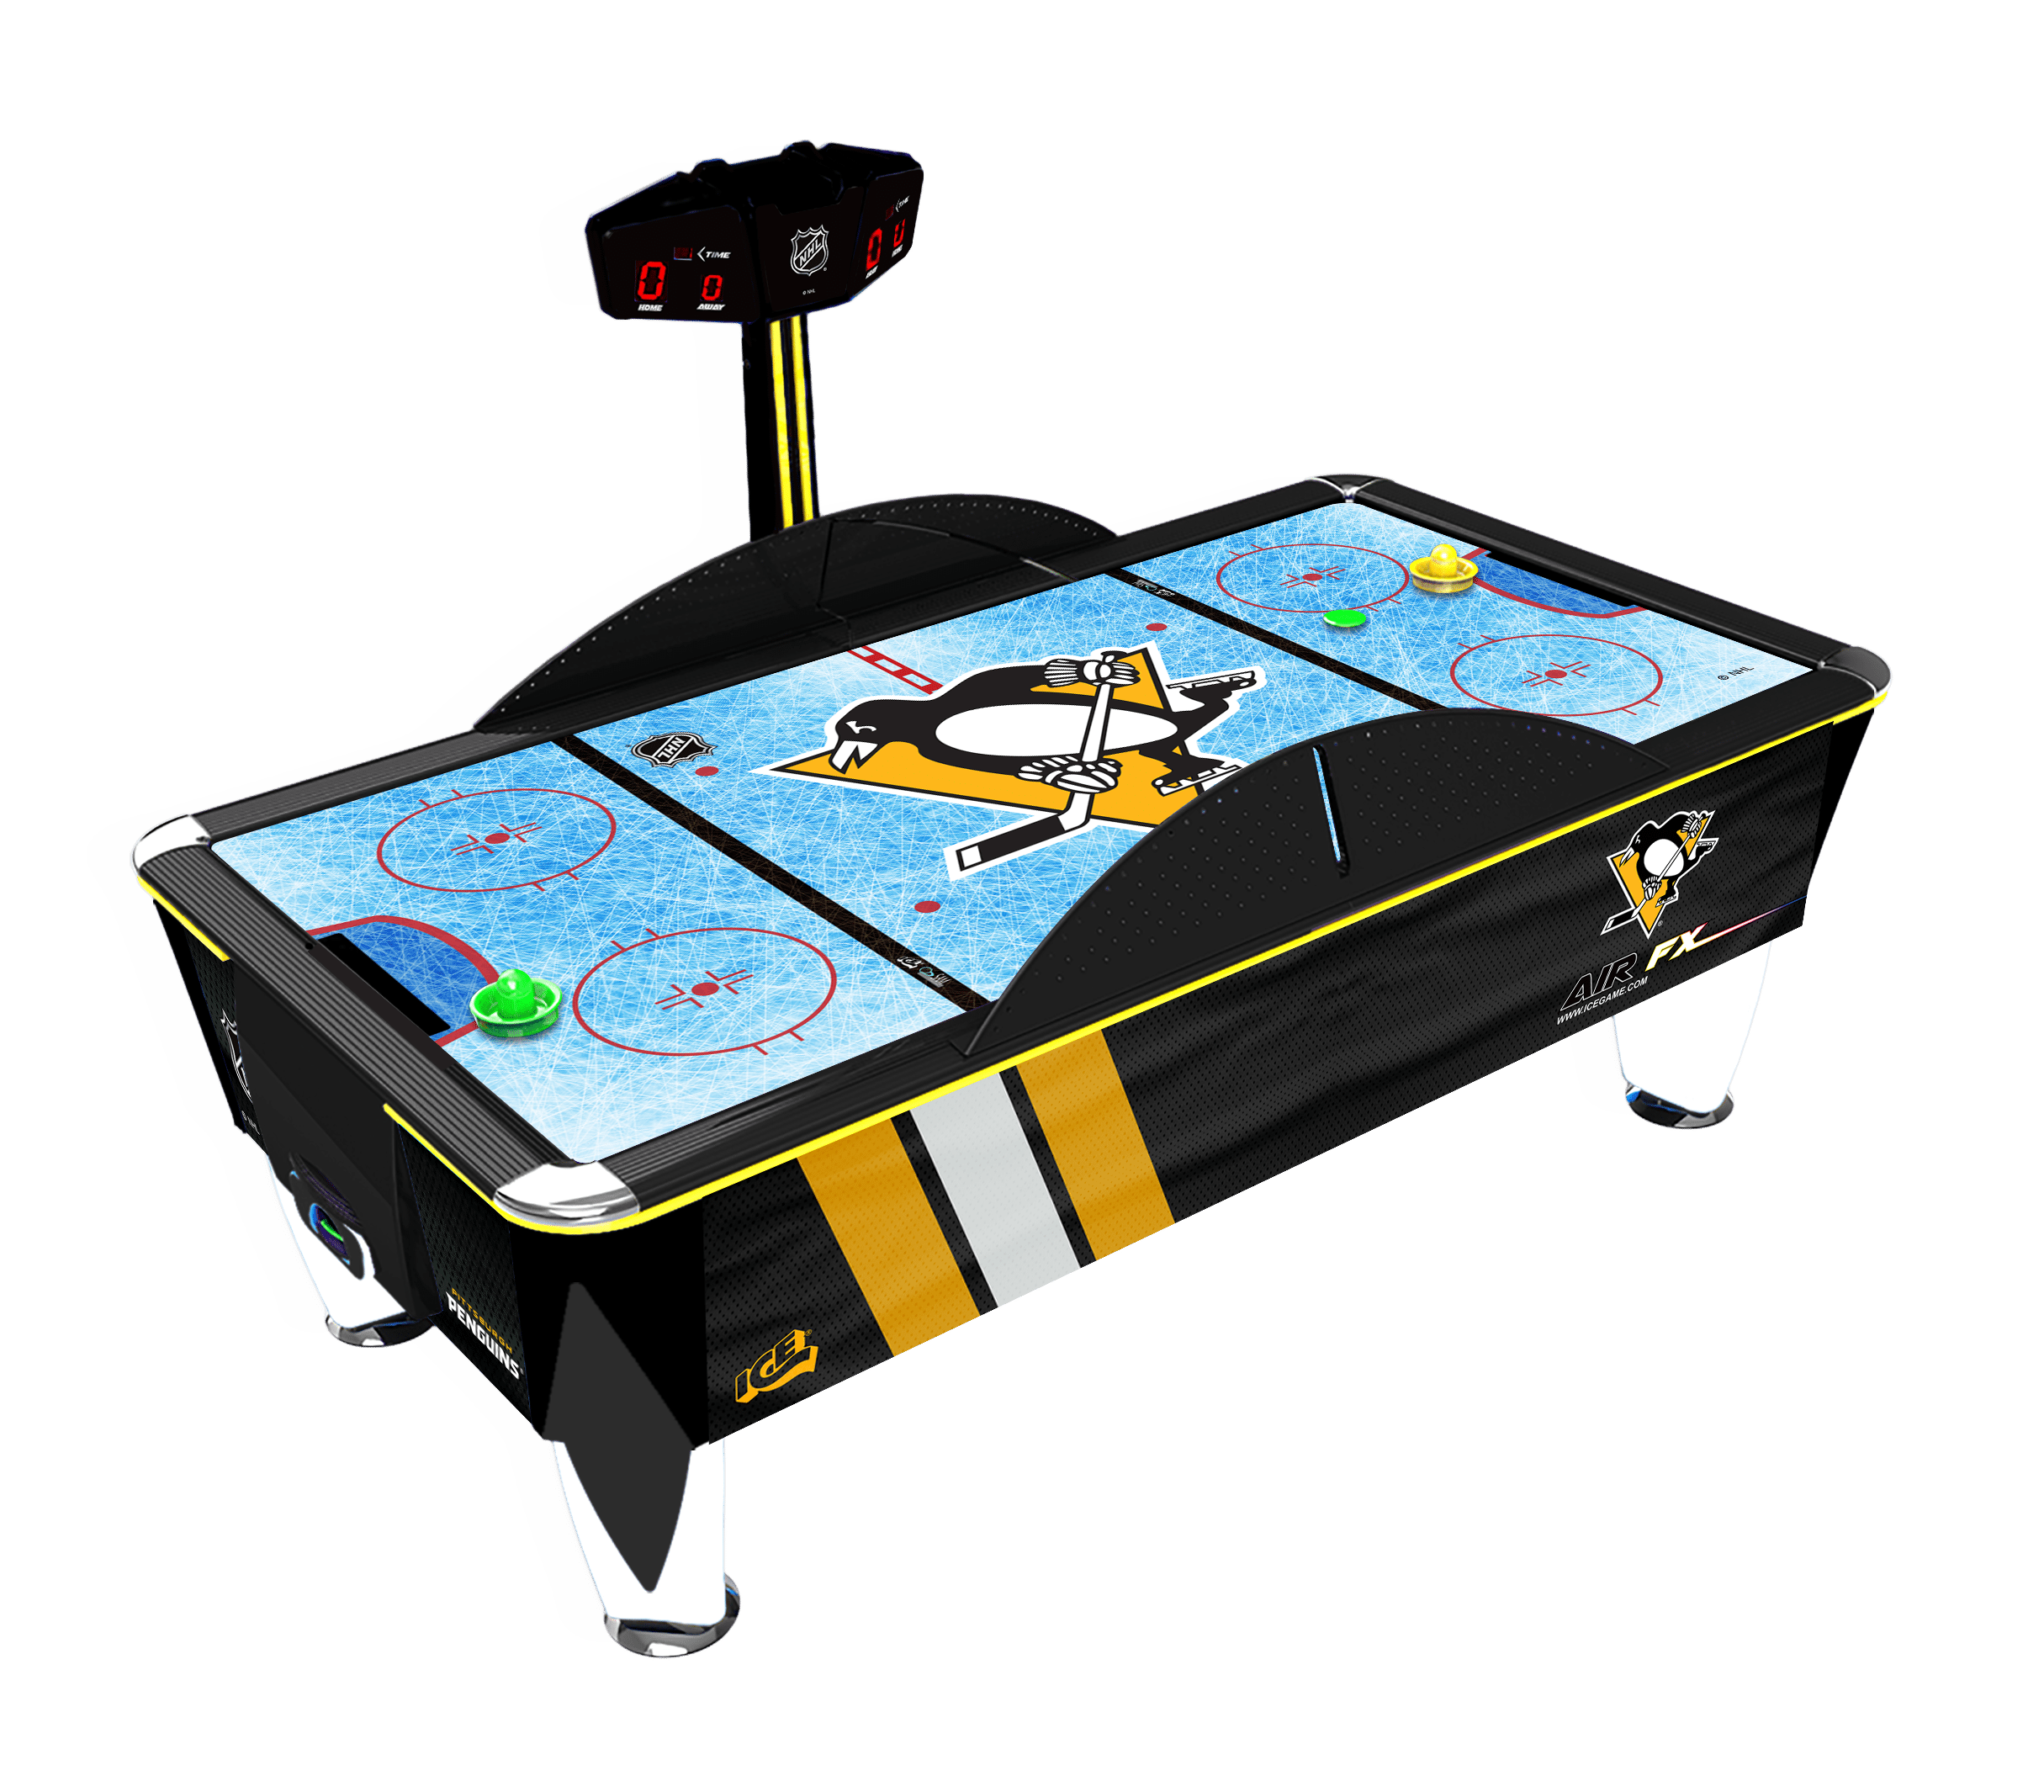 Pittsburgh Penguins Edition NHL licensed Air FX Air Hockey Full Size